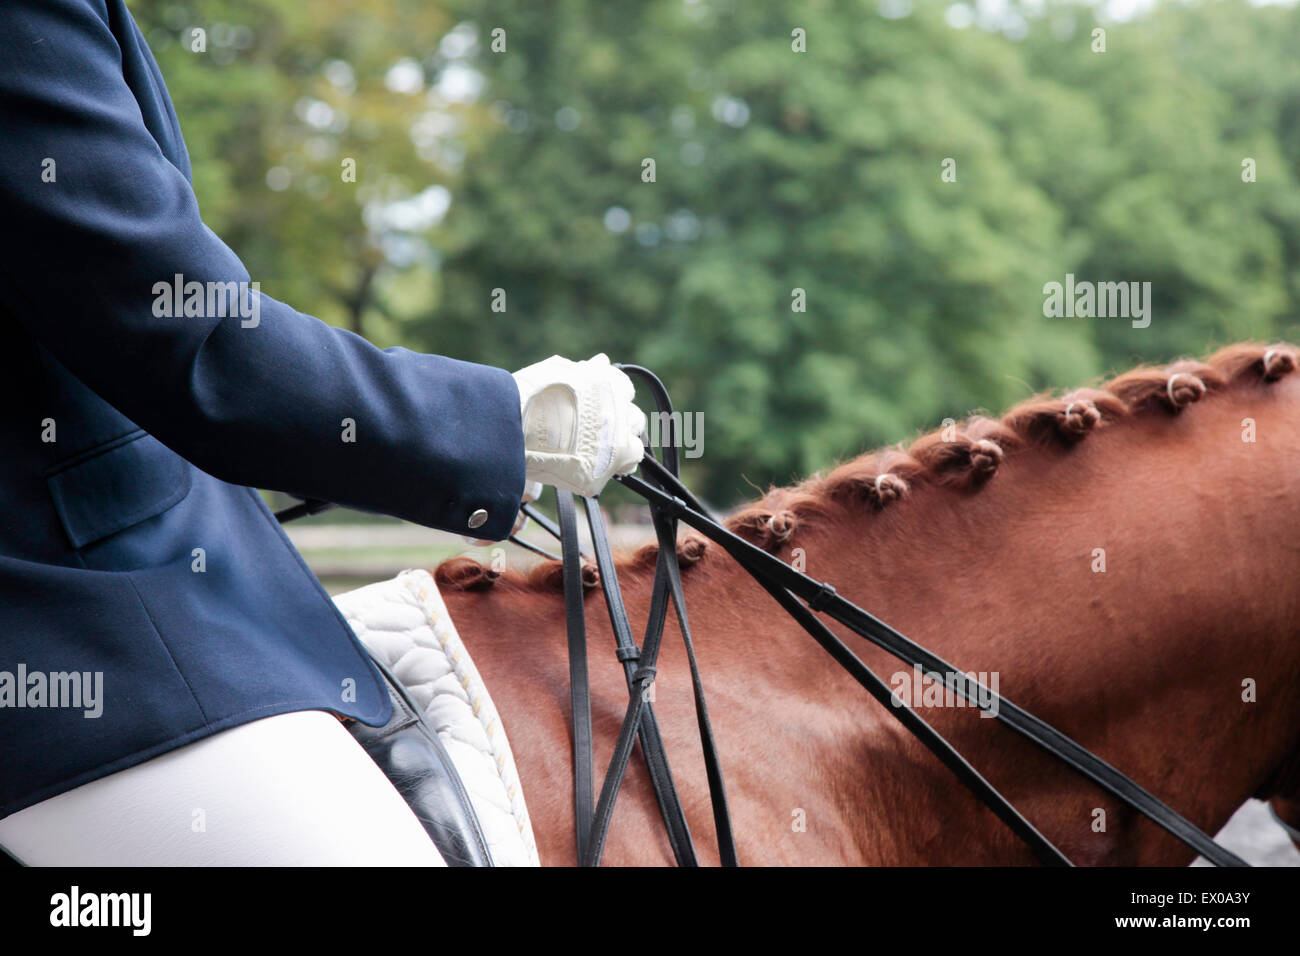 Horse and rider in dressage event Stock Photo